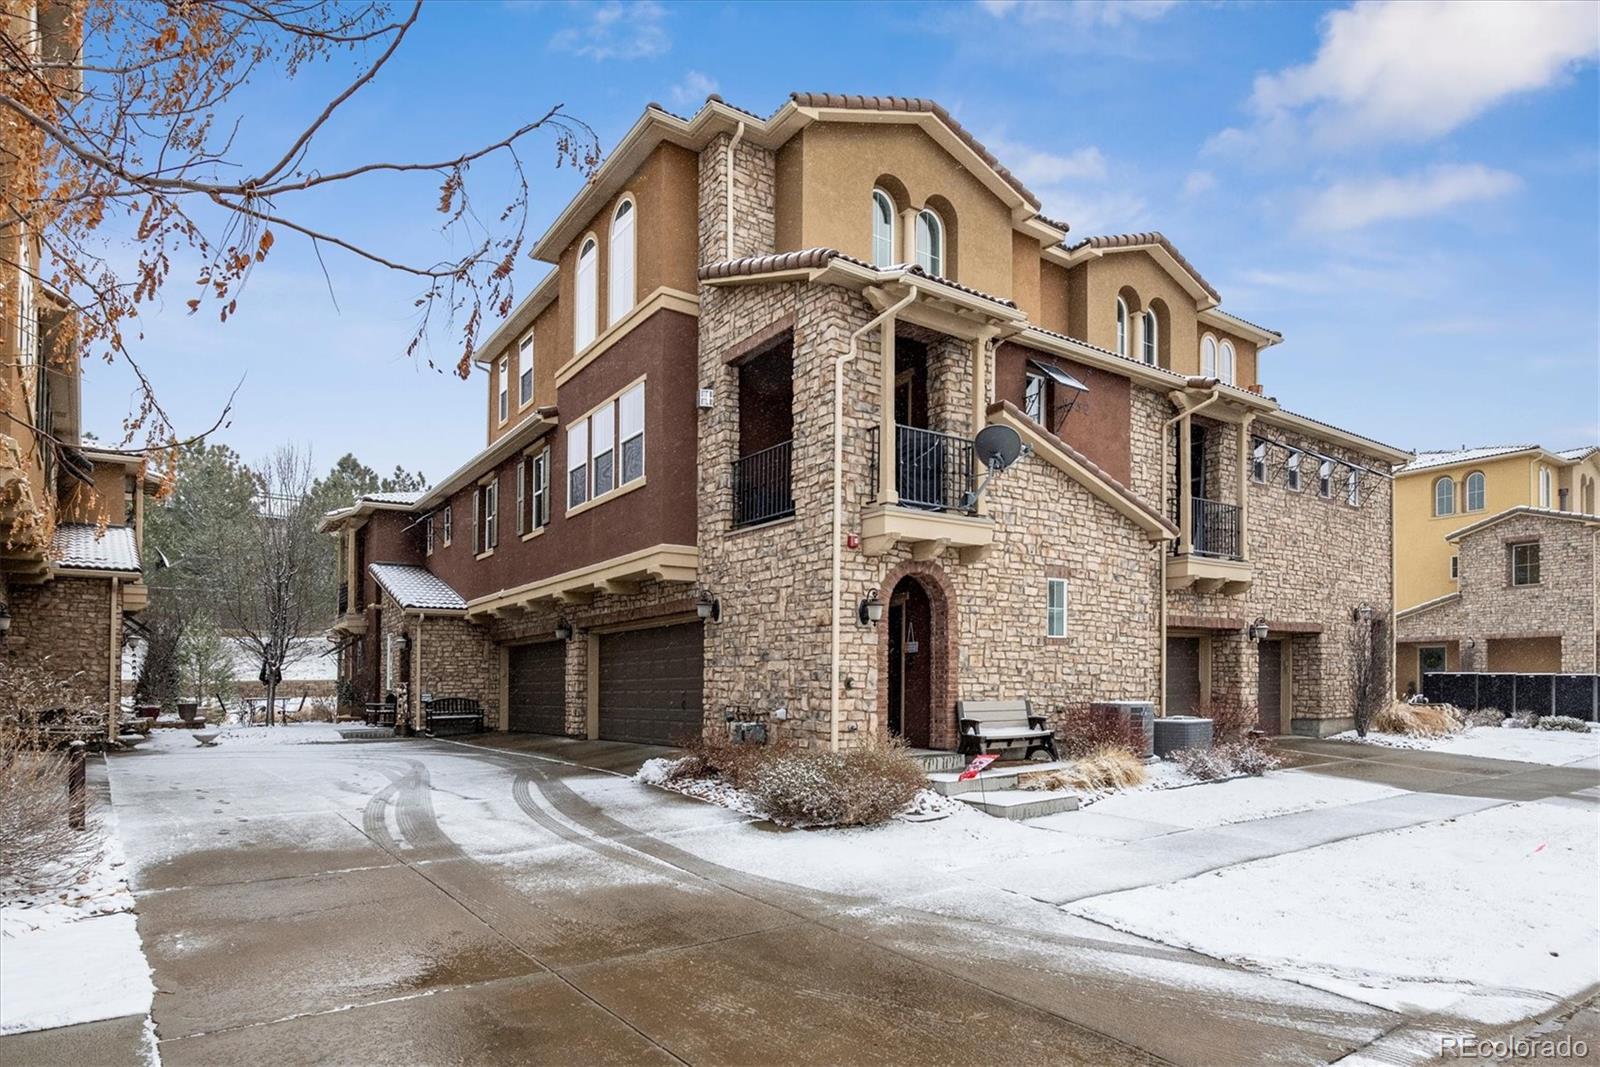 9452  loggia street, highlands ranch sold home. Closed on 2024-03-22 for $570,000.